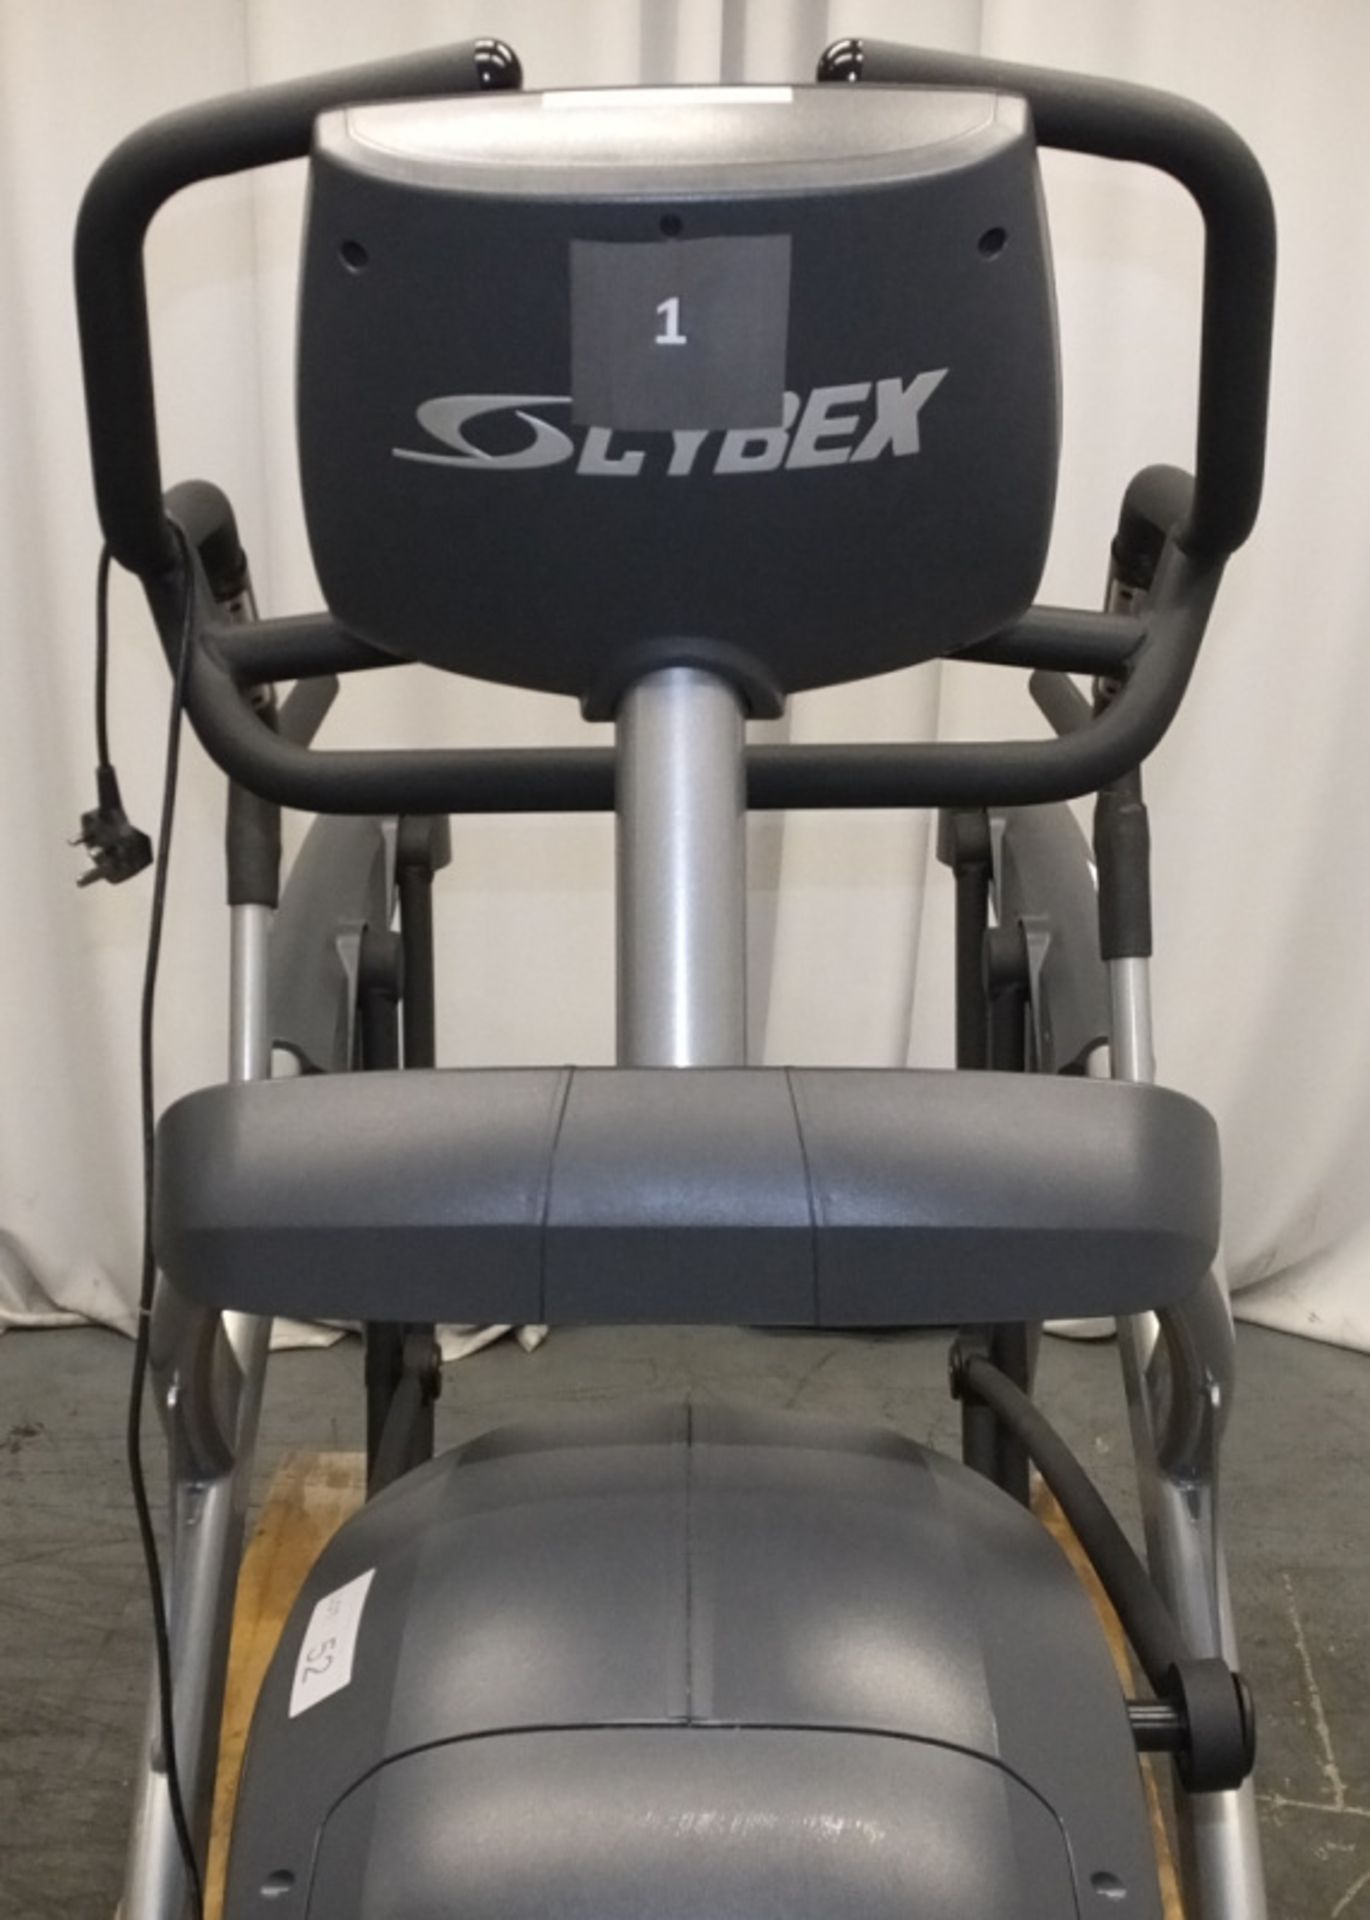 Cybex 750A Total Body ARC Cross Trainer - Image 3 of 19